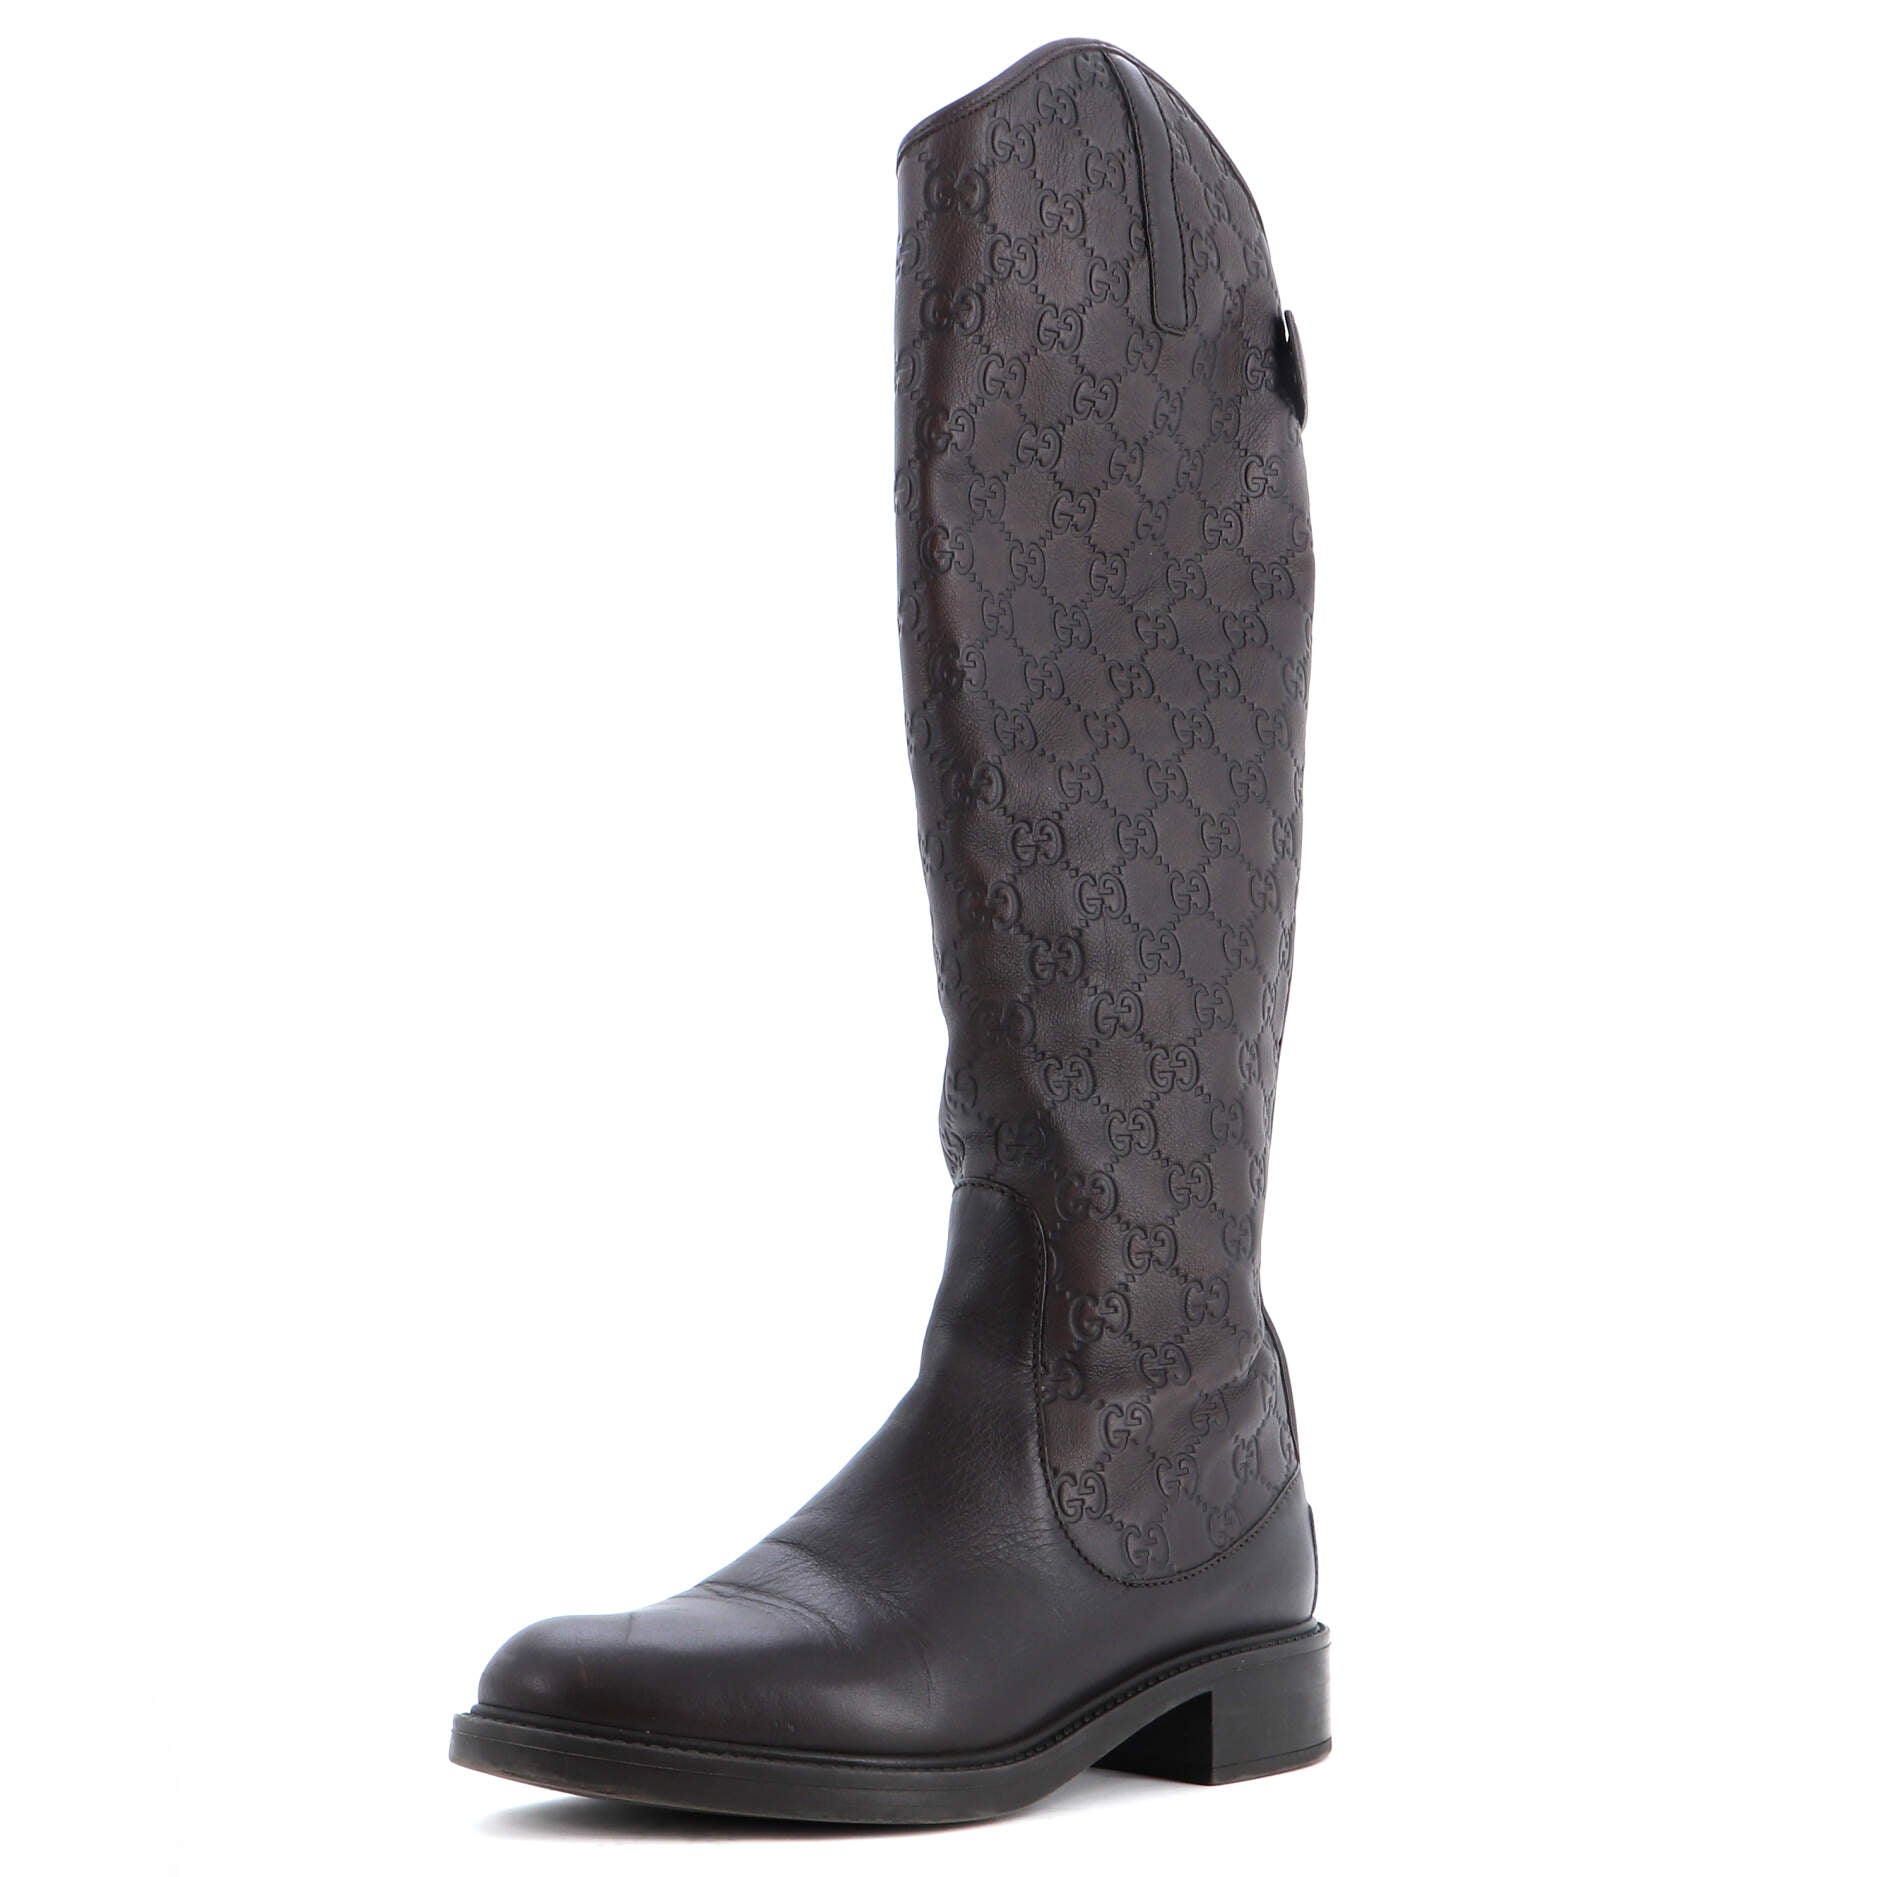 Women's Maude Knee High Riding Boots Guccissima Leather